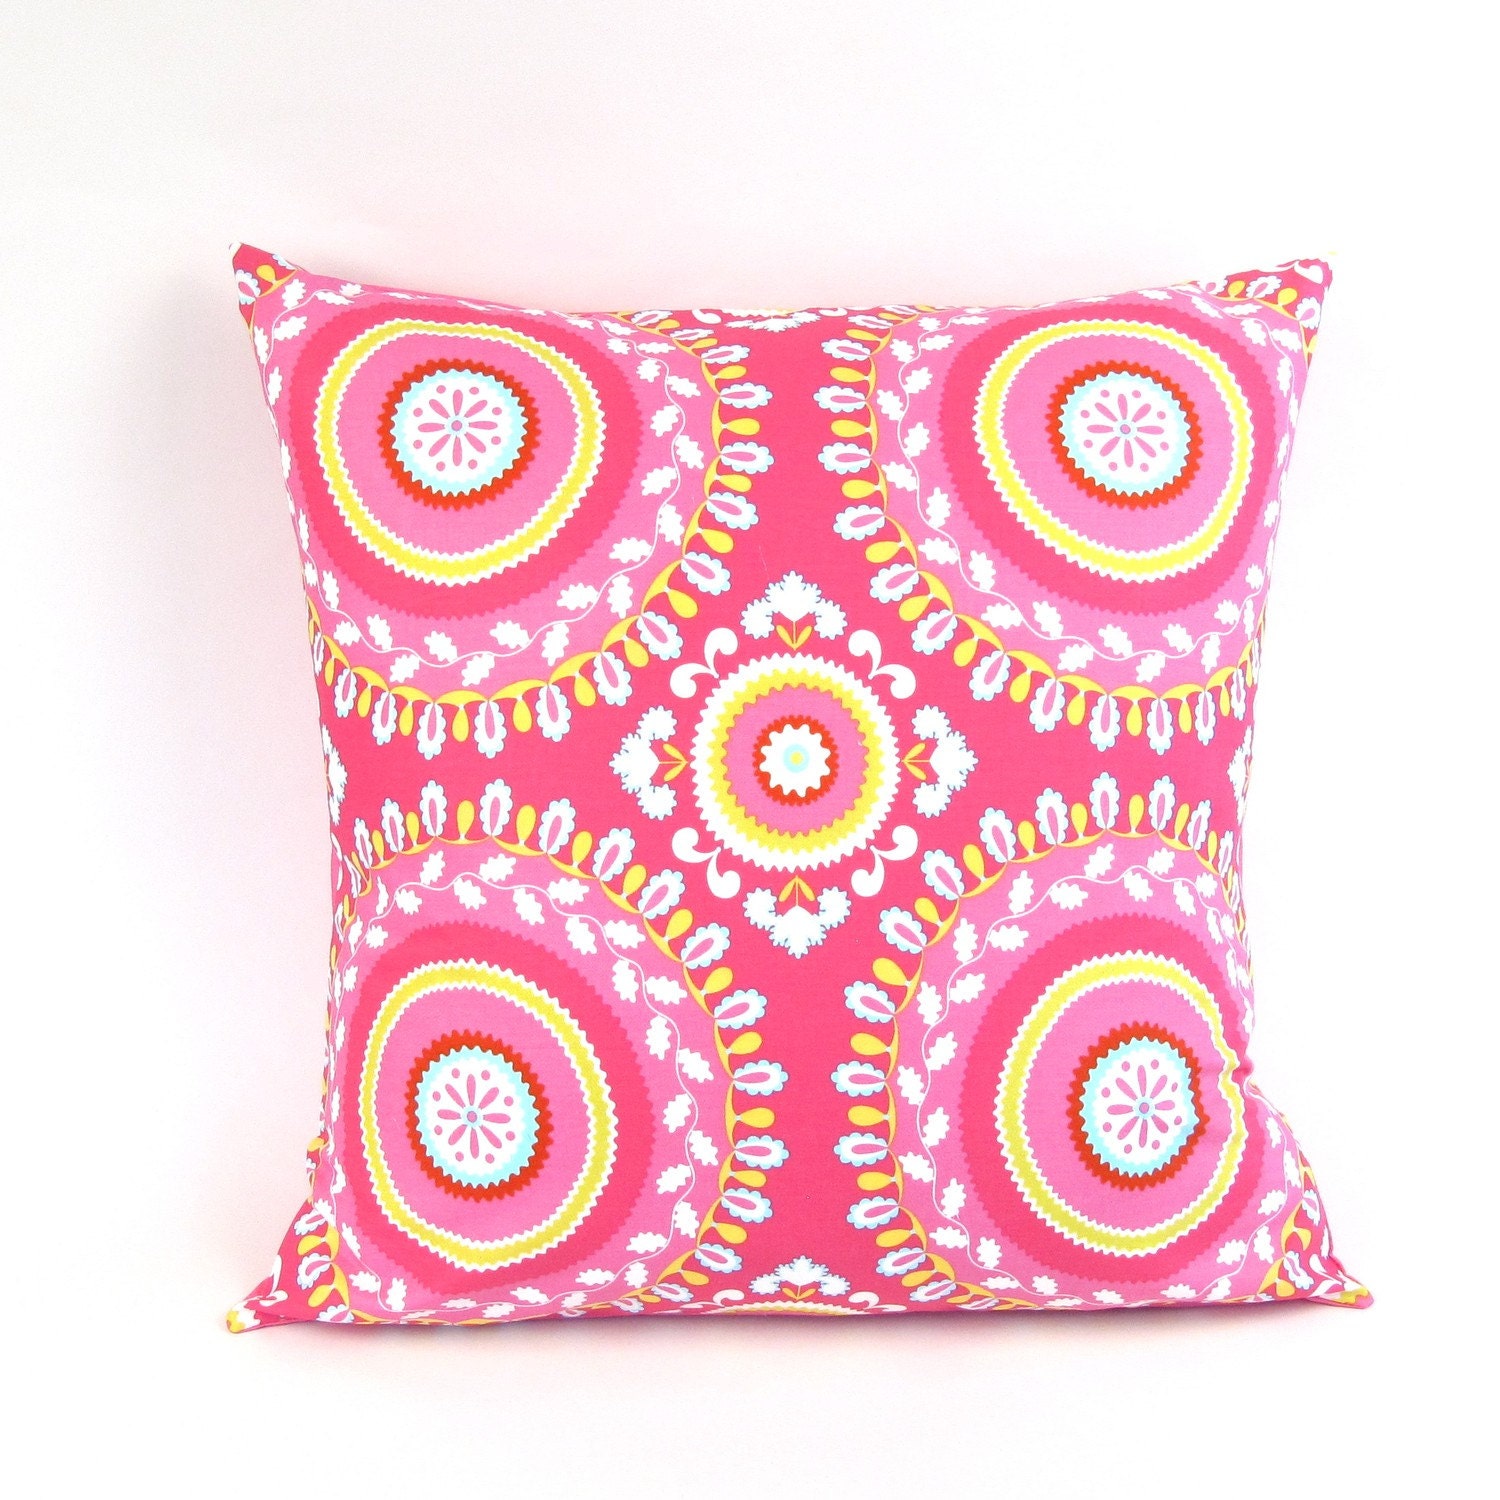 Bohemian Pillow Cover in Honeysuckle Pink 20 inch